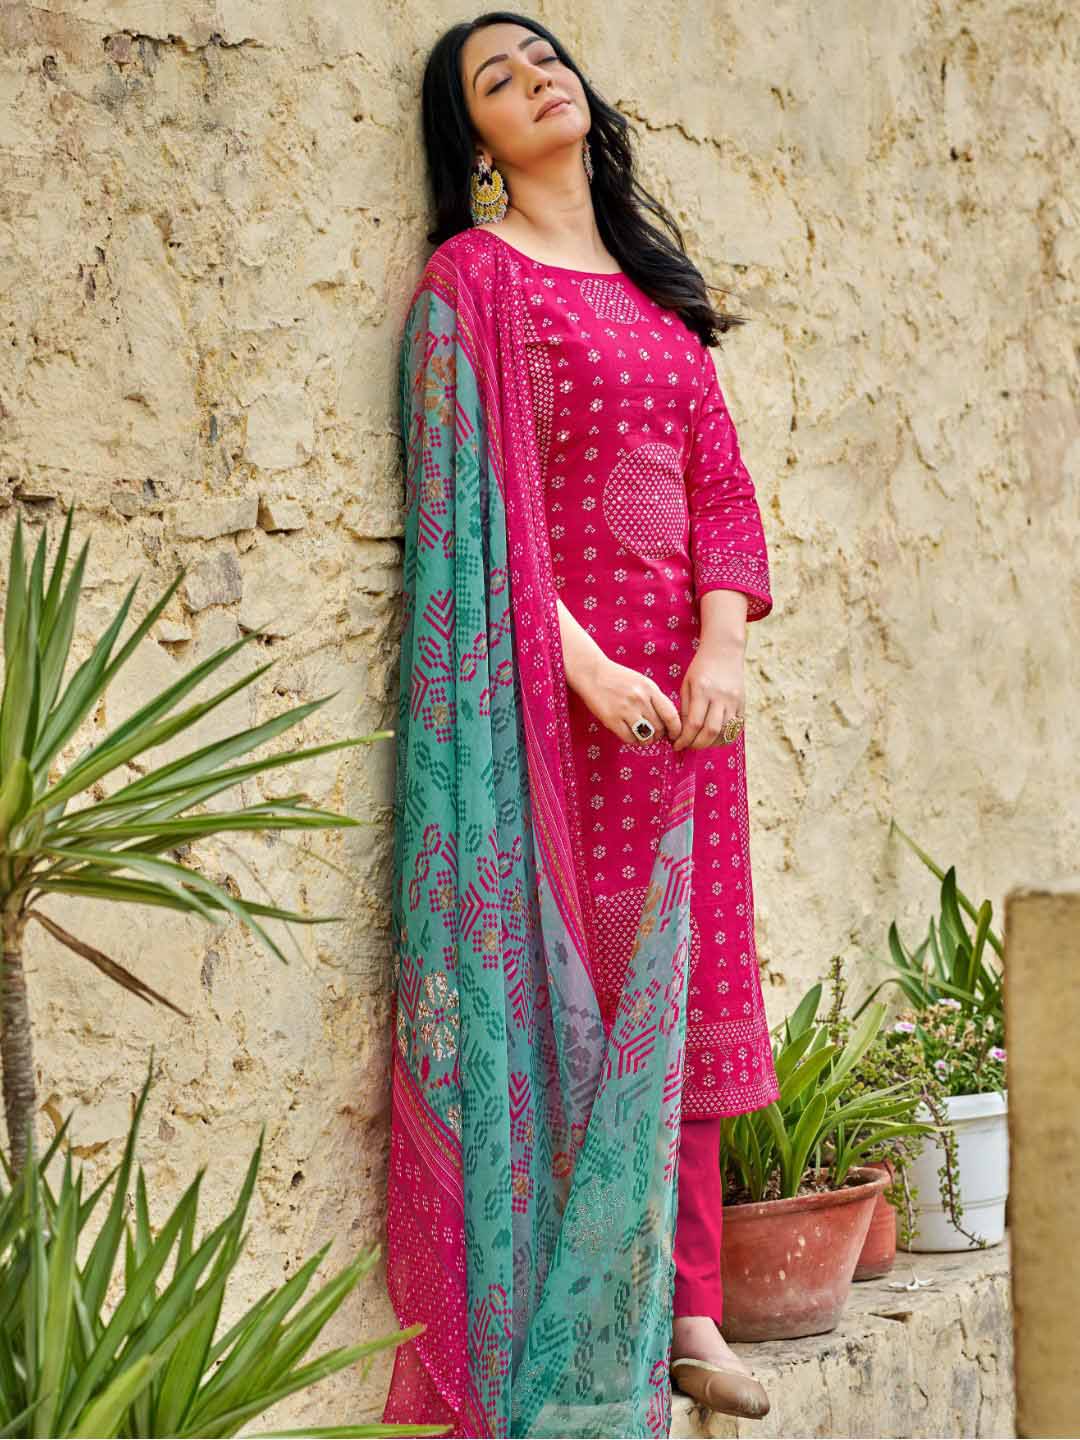 Unstitched Printed Pink Cotton Salwar Suit Dress Material for Women